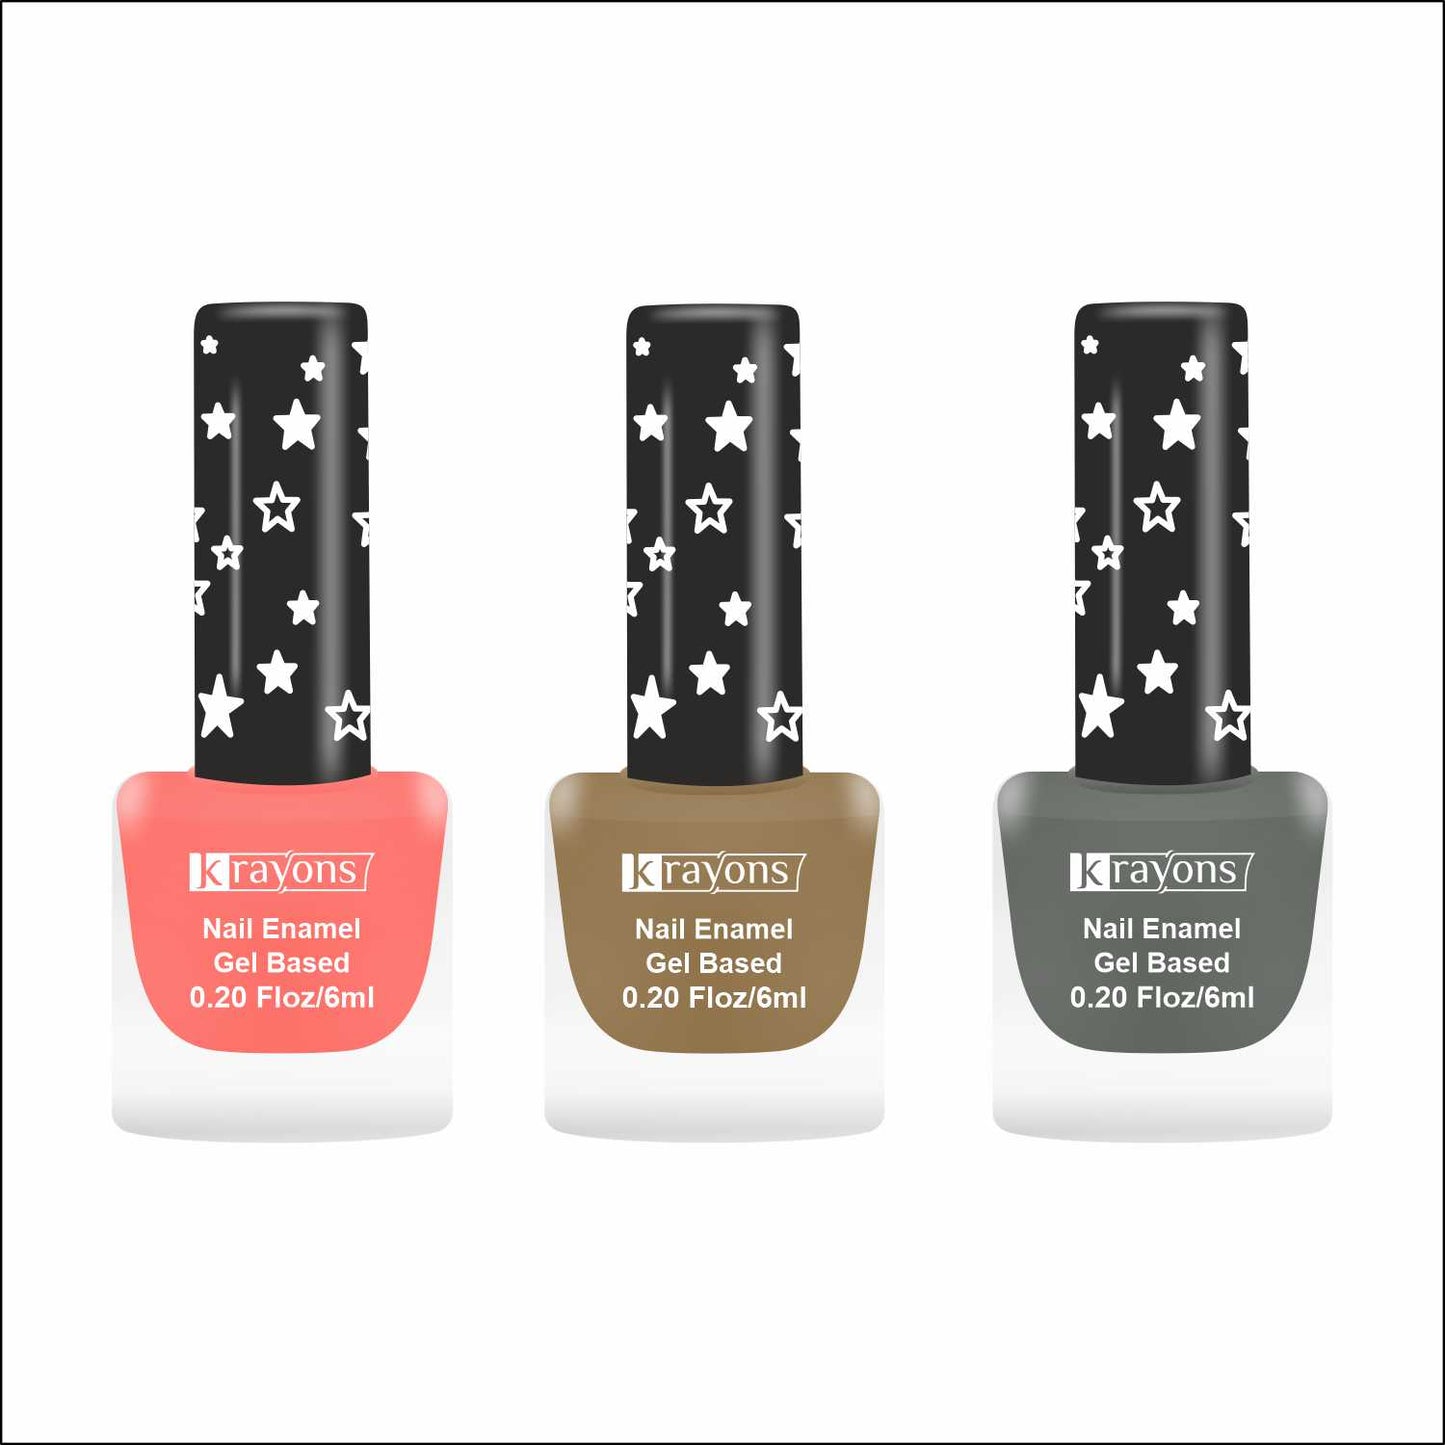 Krayons Cute Super Matte Finish Nail Enamel, Quick Dry, LongLasting, Blossom Peach, Nude Beige, Charcoal Grey, 6ml Each (Pack of 3)